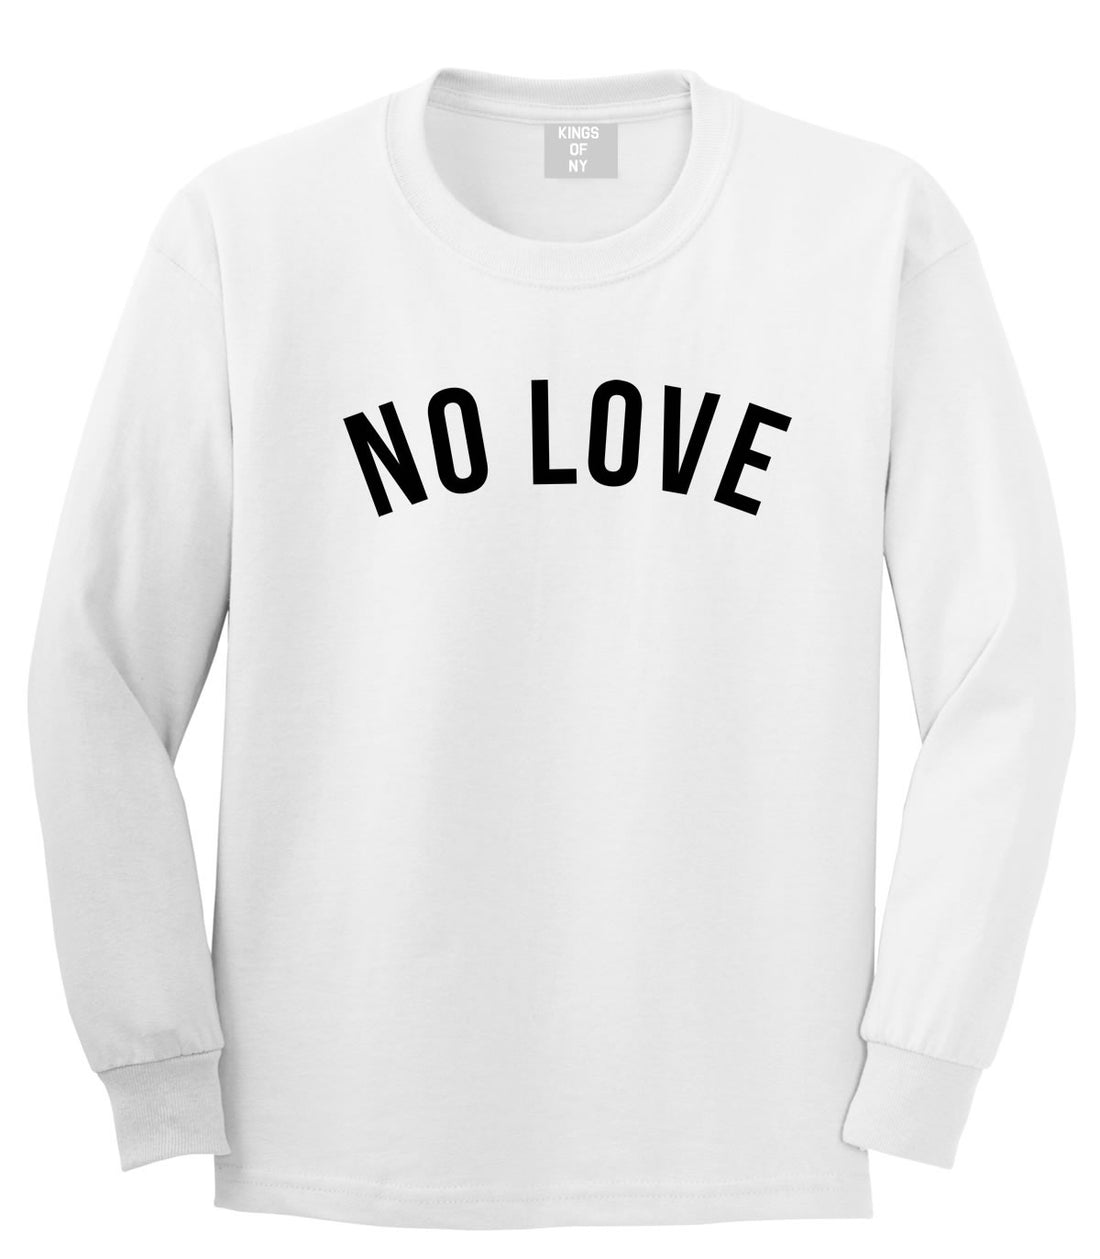 No Love Long Sleeve T-Shirt in White by Kings Of NY